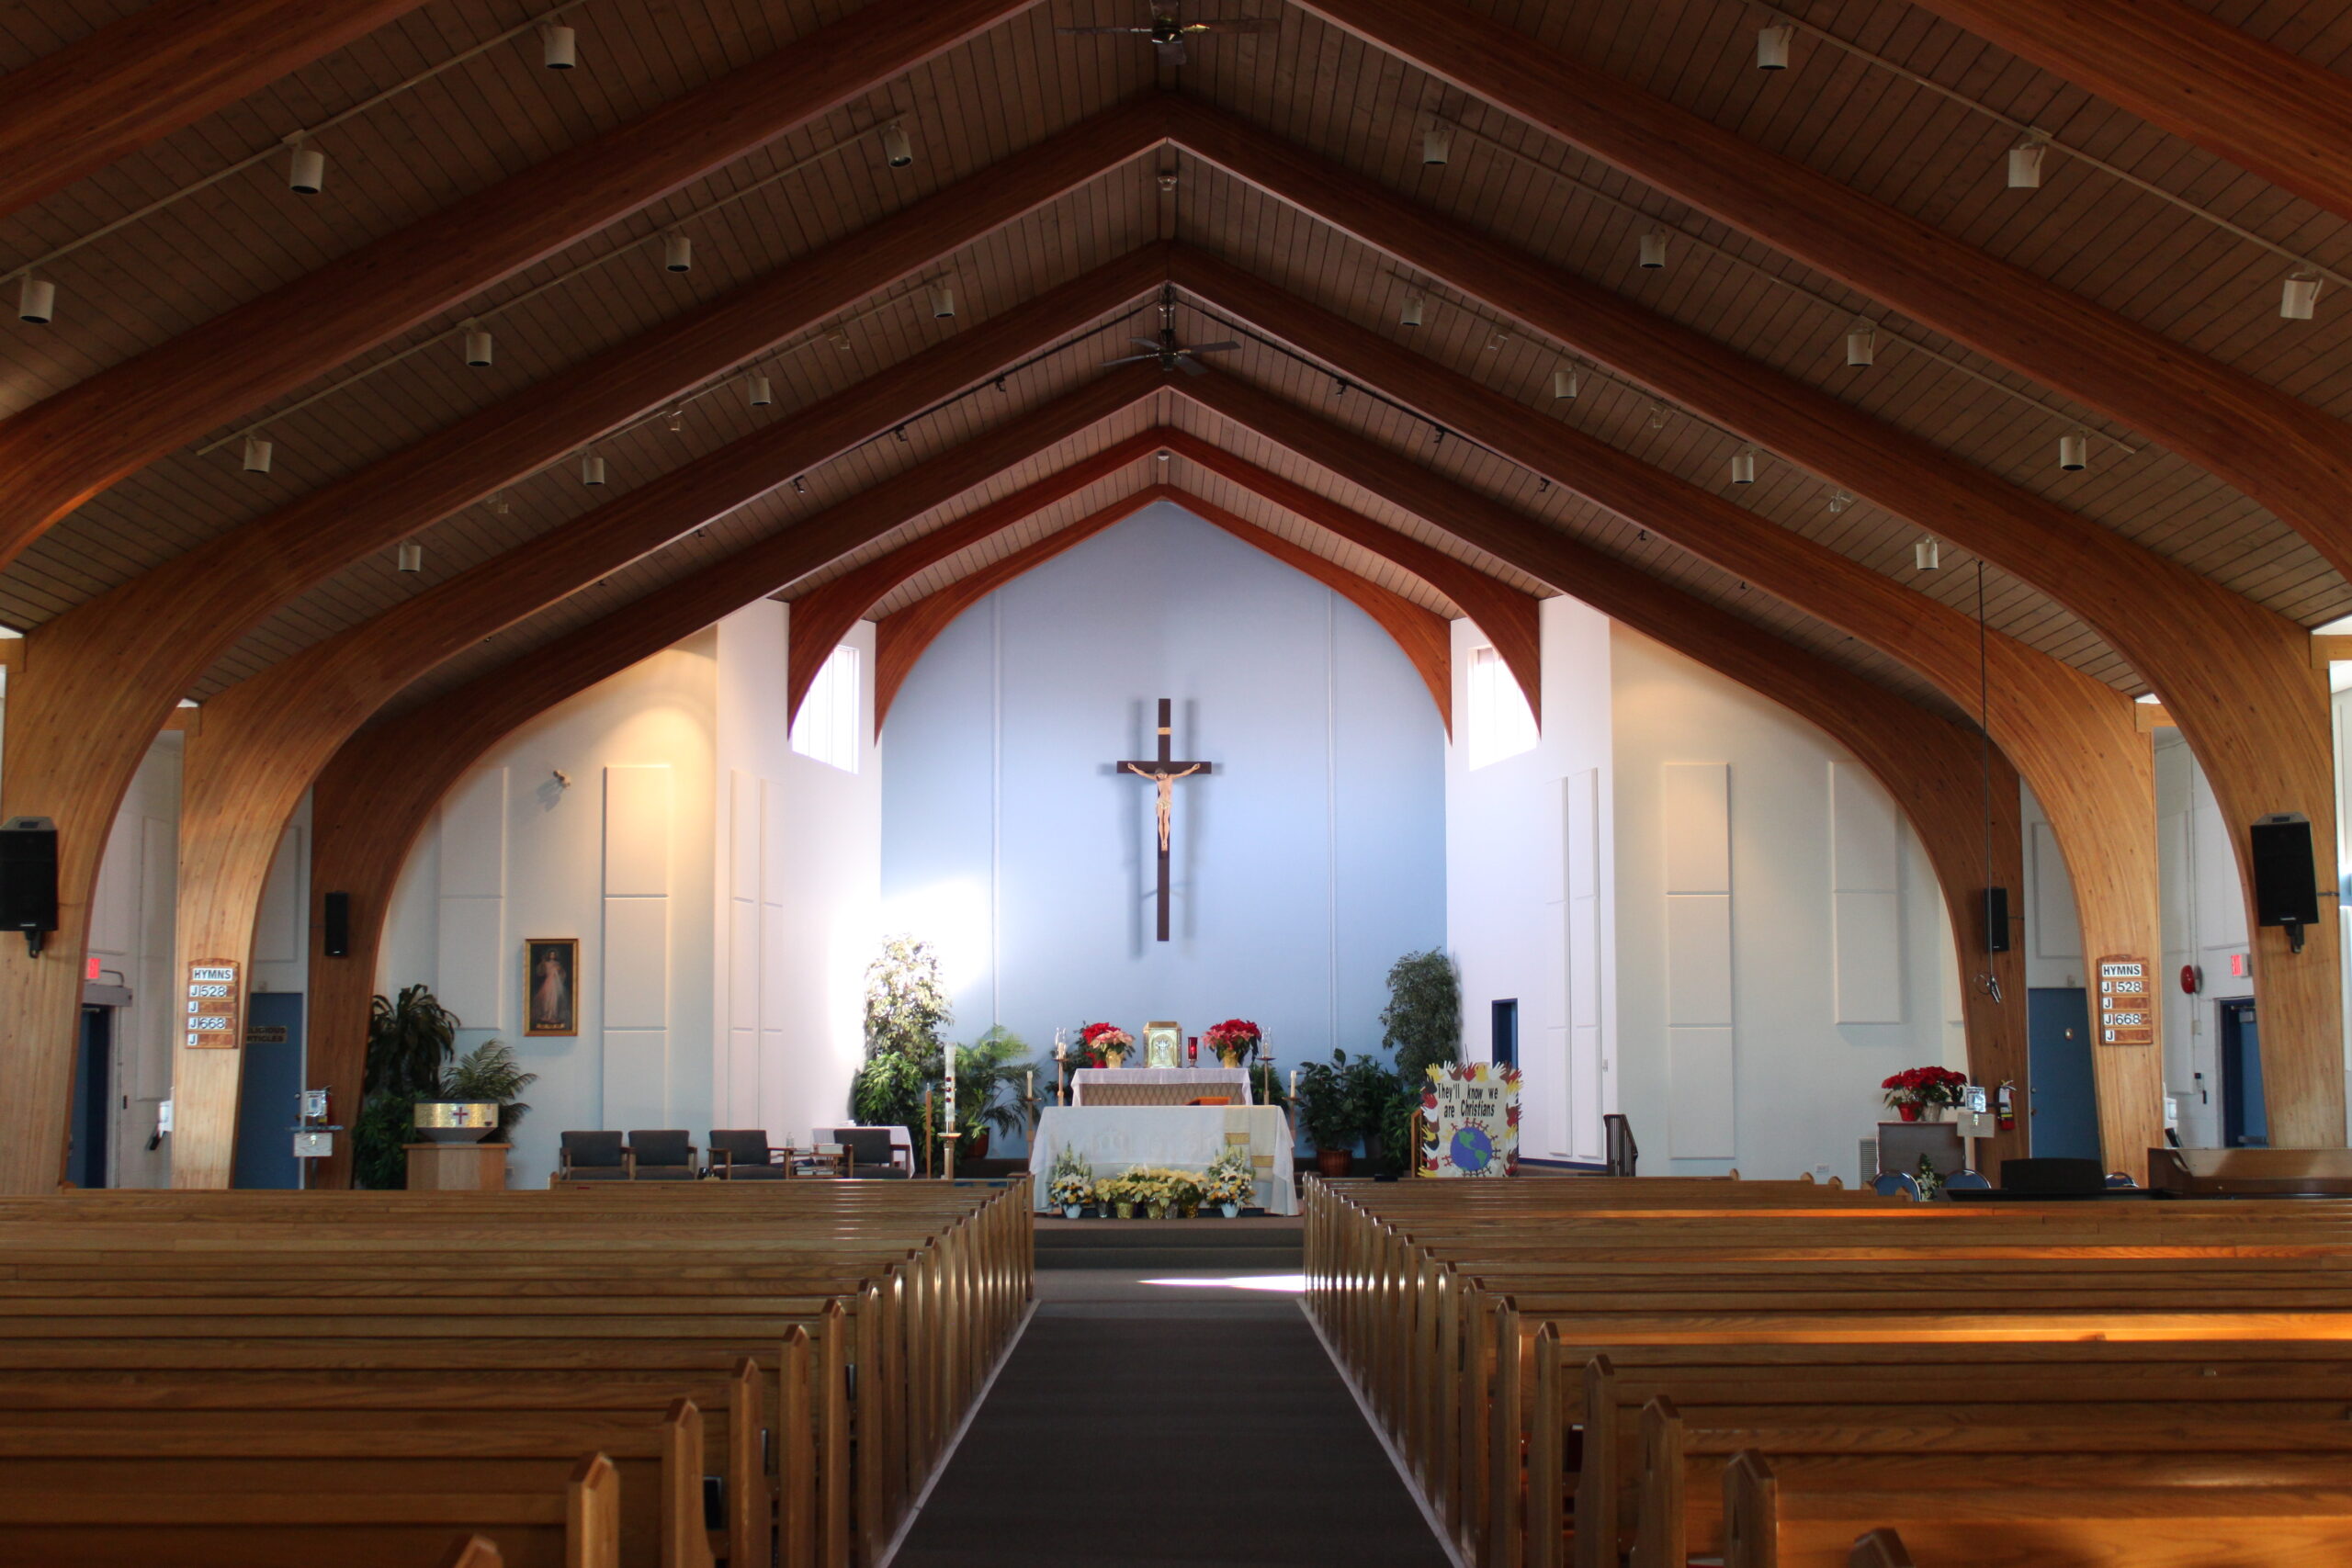 Church nave with wooden ceiliing and white acoustic panels on back wall